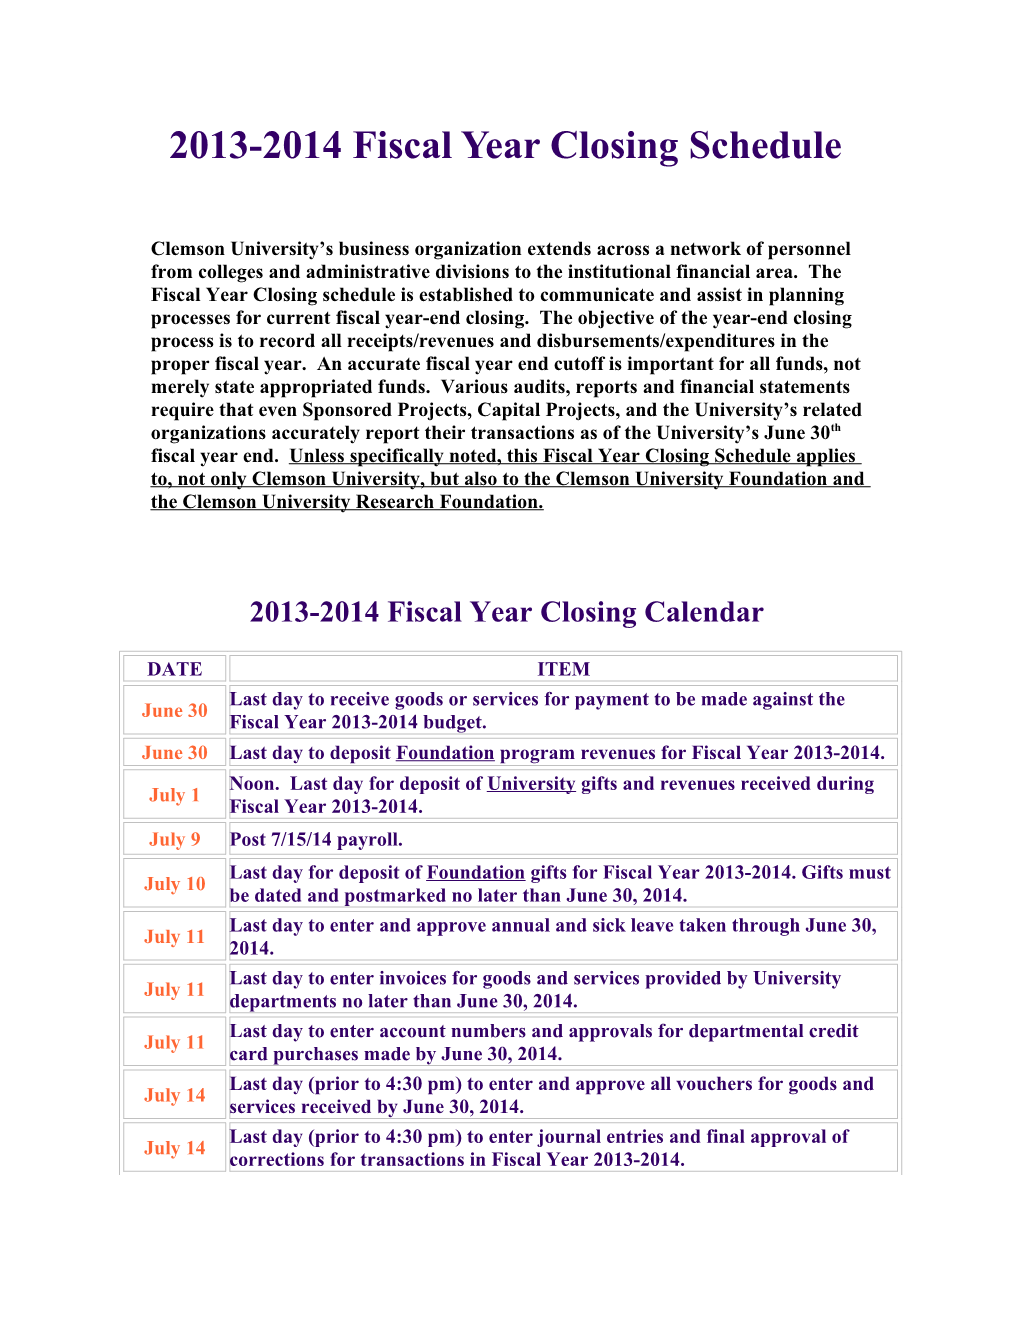 2004-2005 Fiscal Year Closing Schedule